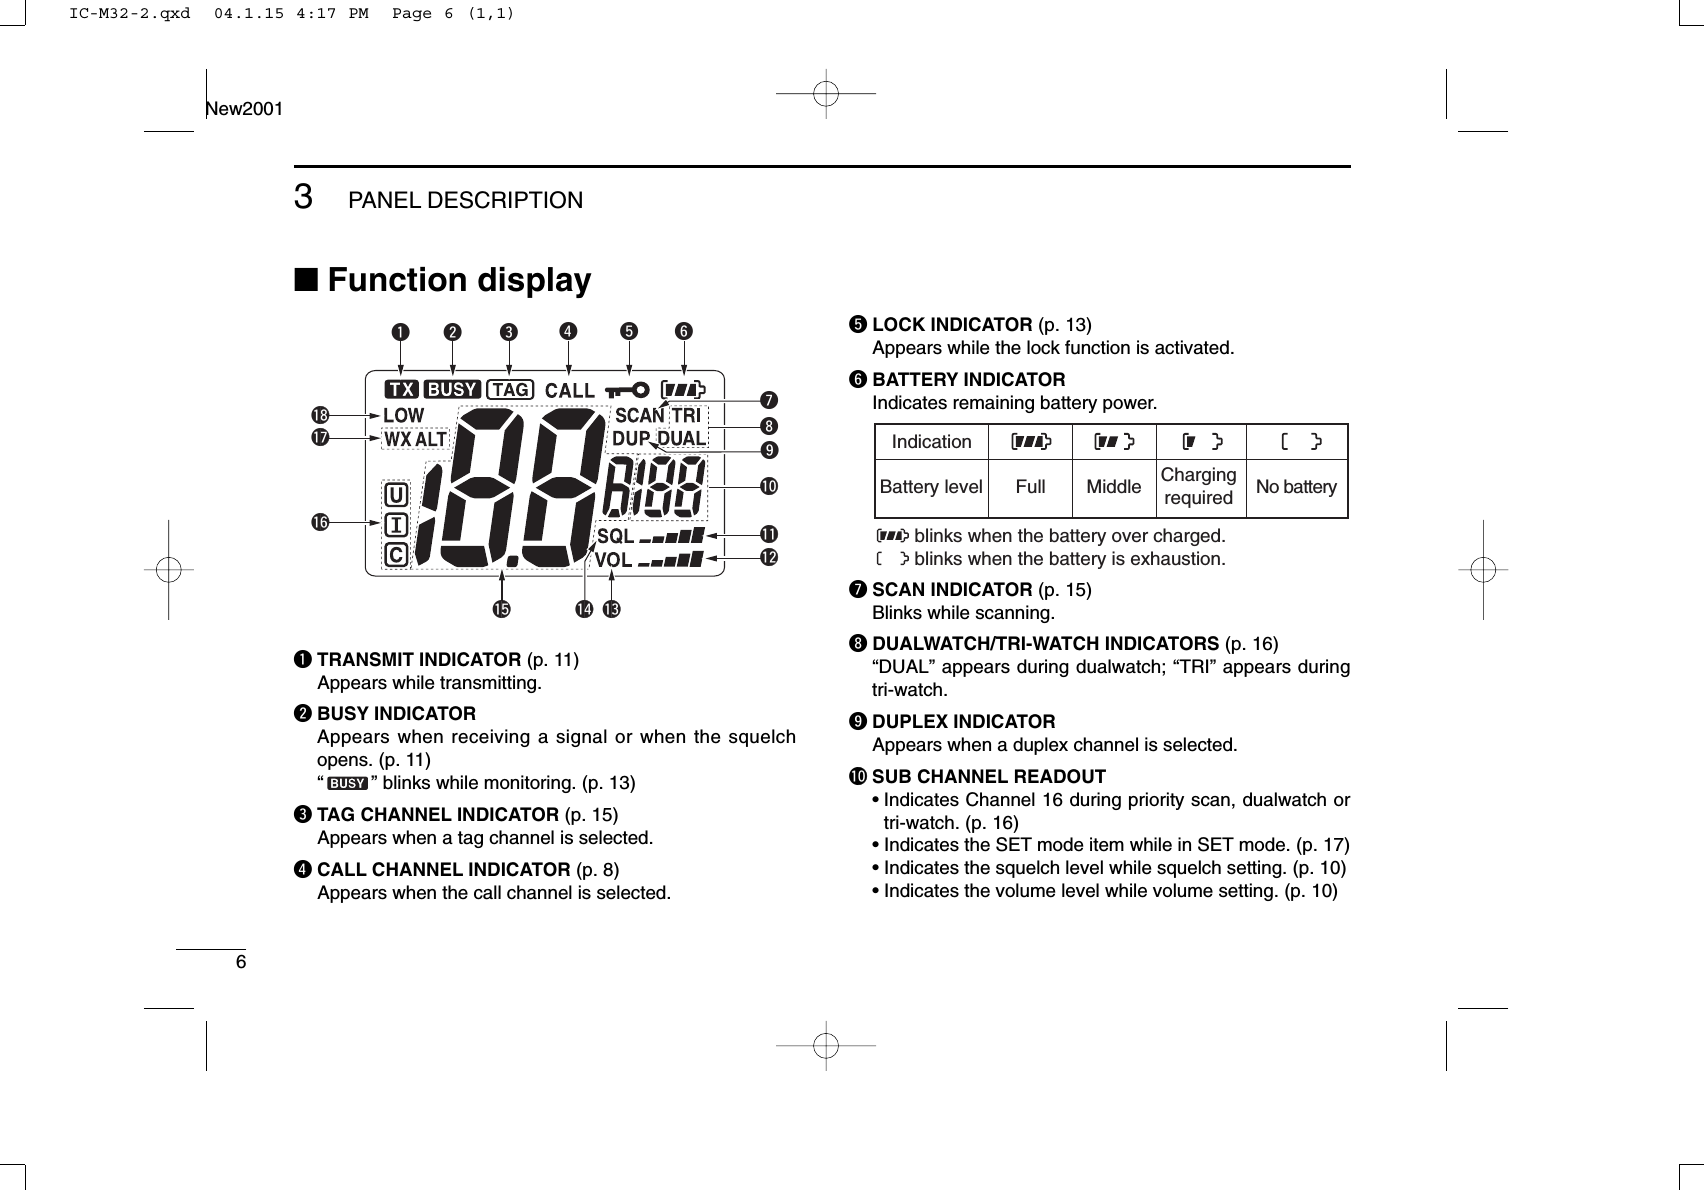 63PANEL DESCRIPTIONNew2001■Function displayqTRANSMIT INDICATOR (p. 11)Appears while transmitting.wBUSY INDICATORAppears when receiving a signal or when the squelchopens. (p. 11)“” blinks while monitoring. (p. 13)eTAG CHANNEL INDICATOR (p. 15)Appears when a tag channel is selected.rCALL CHANNEL INDICATOR (p. 8)Appears when the call channel is selected.tLOCK INDICATOR (p. 13)Appears while the lock function is activated.yBATTERY INDICATORIndicates remaining battery power.uSCAN INDICATOR (p. 15)Blinks while scanning.iDUALWATCH/TRI-WATCH INDICATORS (p. 16)“DUAL” appears during dualwatch; “TRI” appears duringtri-watch.oDUPLEX INDICATORAppears when a duplex channel is selected.!0 SUB CHANNEL READOUT• Indicates Channel 16 during priority scan, dualwatch ortri-watch. (p. 16)• Indicates the SET mode item while in SET mode. (p. 17)• Indicates the squelch level while squelch setting. (p. 10)• Indicates the volume level while volume setting. (p. 10)IndicationFull Middle Chargingrequired No batteryBattery levelblinks when the battery is exhaustion.blinks when the battery over charged.qerytw!5 !3!4iuo!2!1!0!8!6!7IC-M32-2.qxd  04.1.15 4:17 PM  Page 6 (1,1)